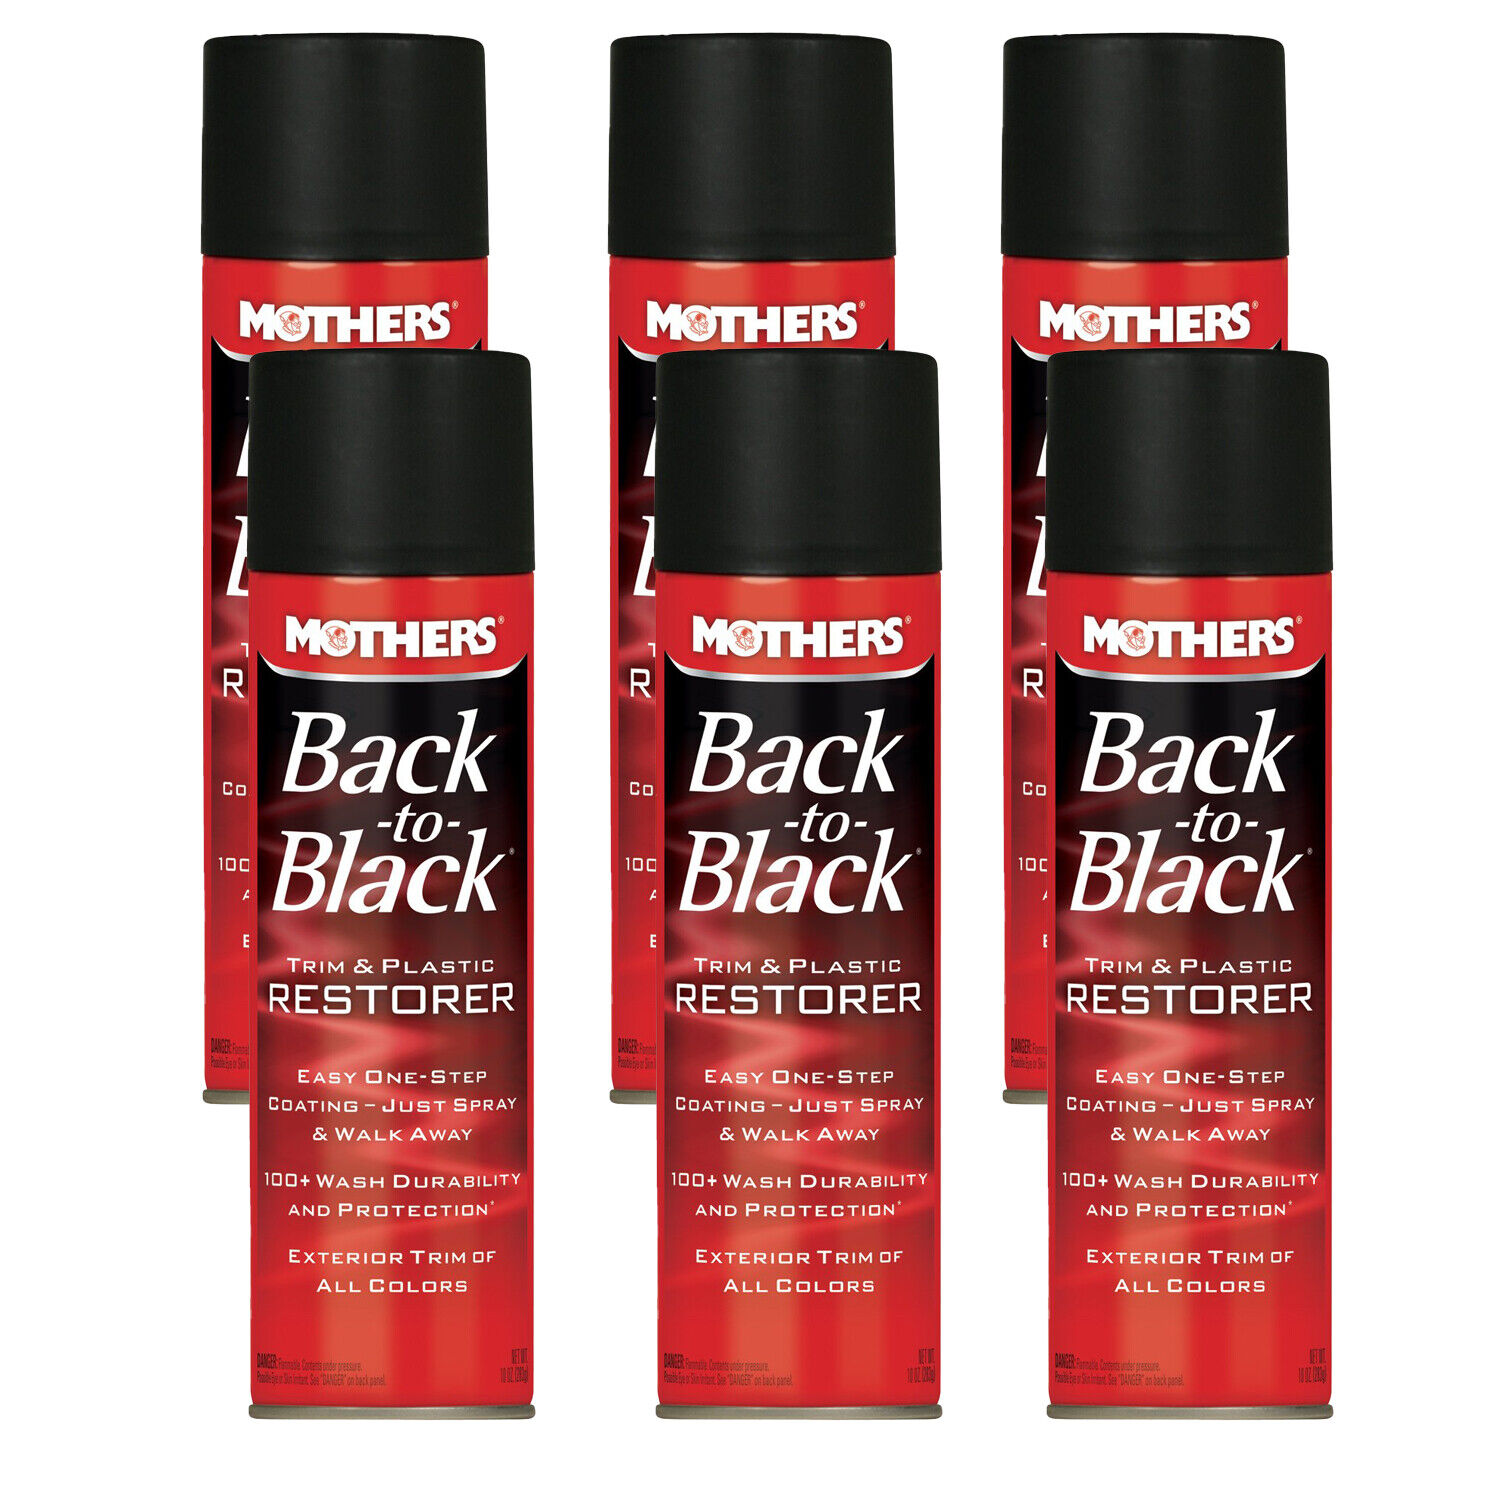 Mothers 06110 Back to Black Plastic and Trim Restorer Aerosol, 10 Ounce, 6 Pack